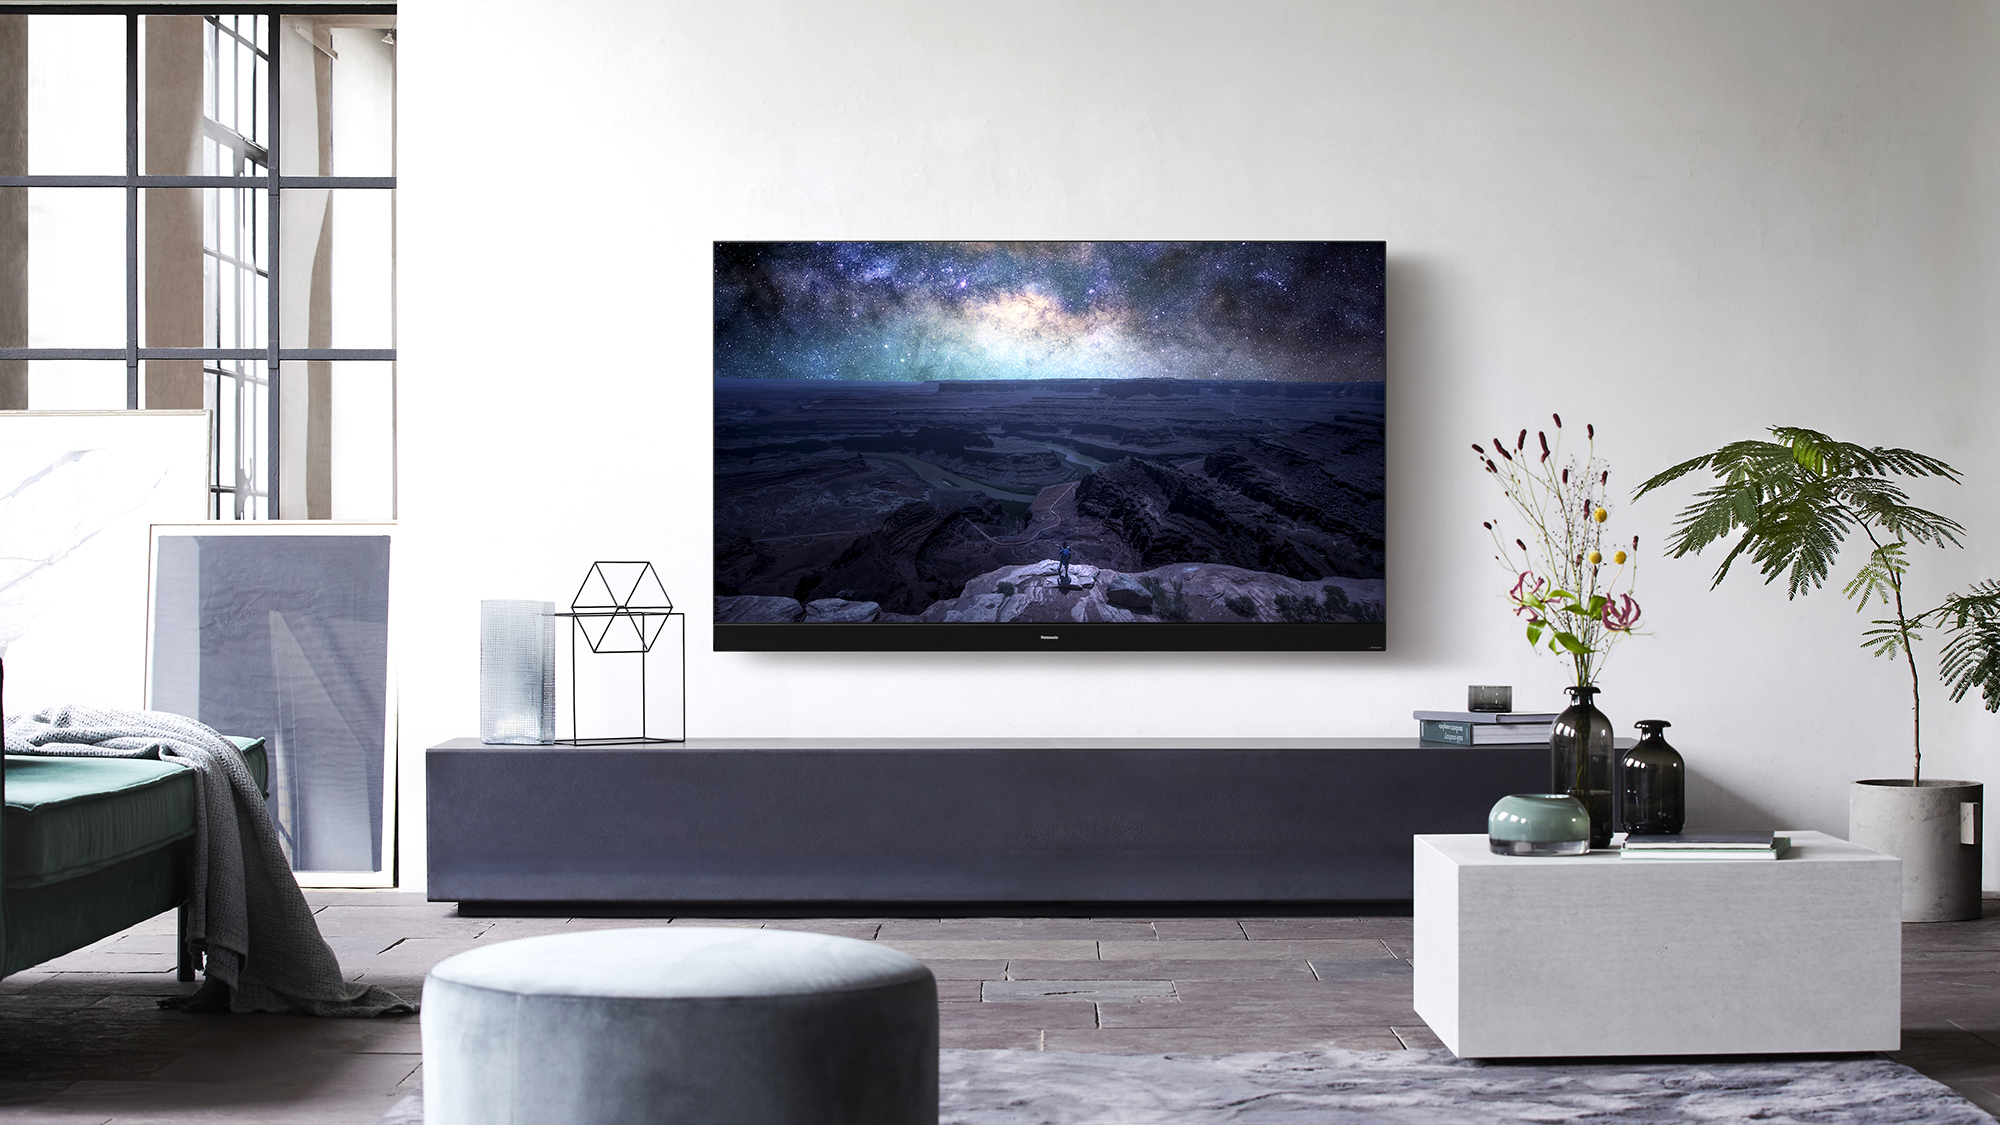 The 5 Best HD Televisions To Buy Today